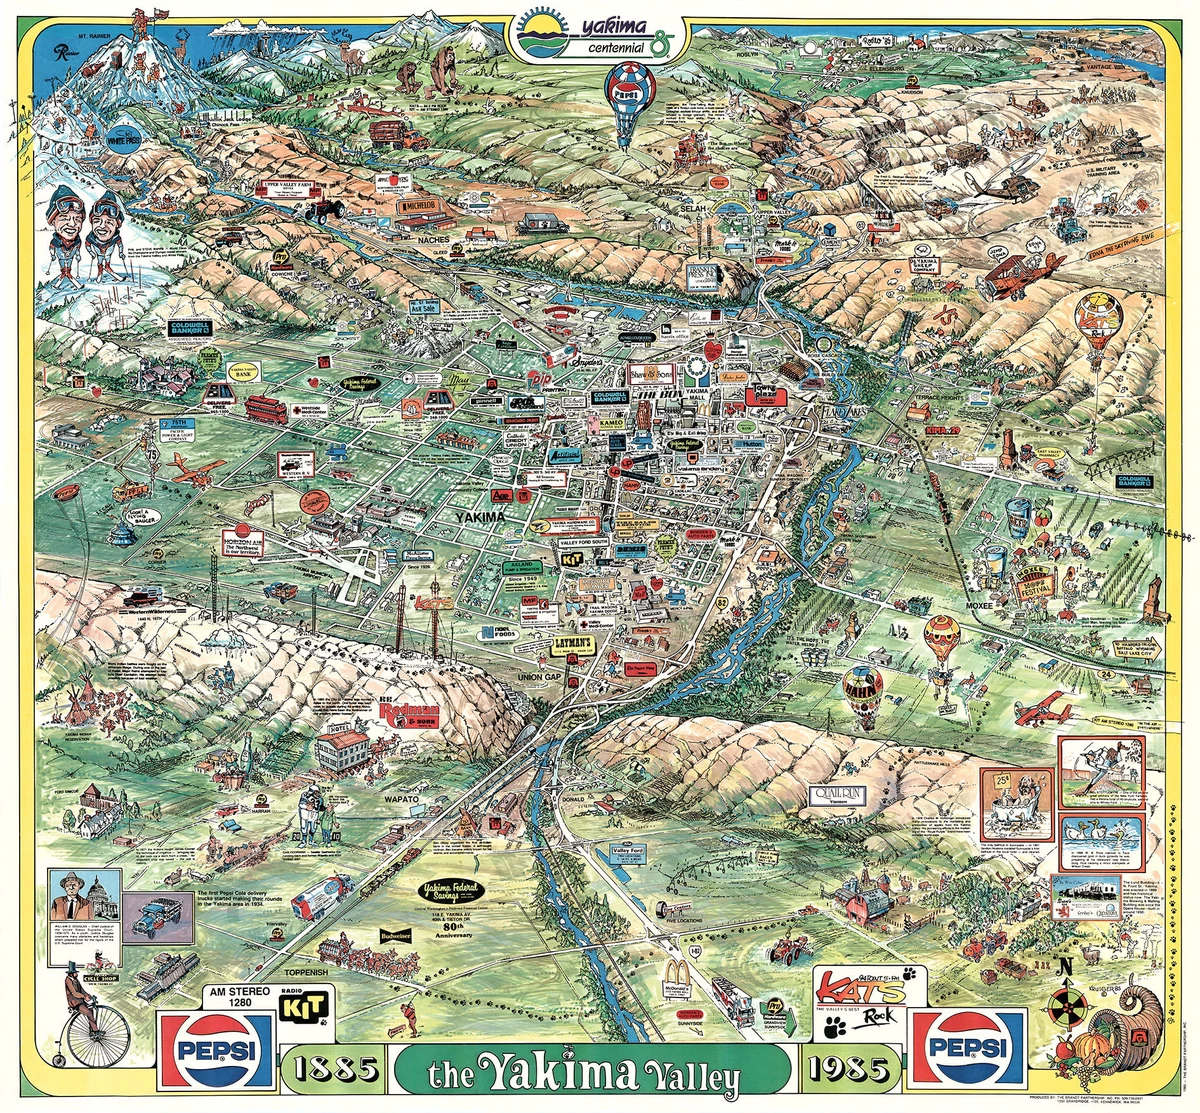 Download This 1985 Map of Yakima